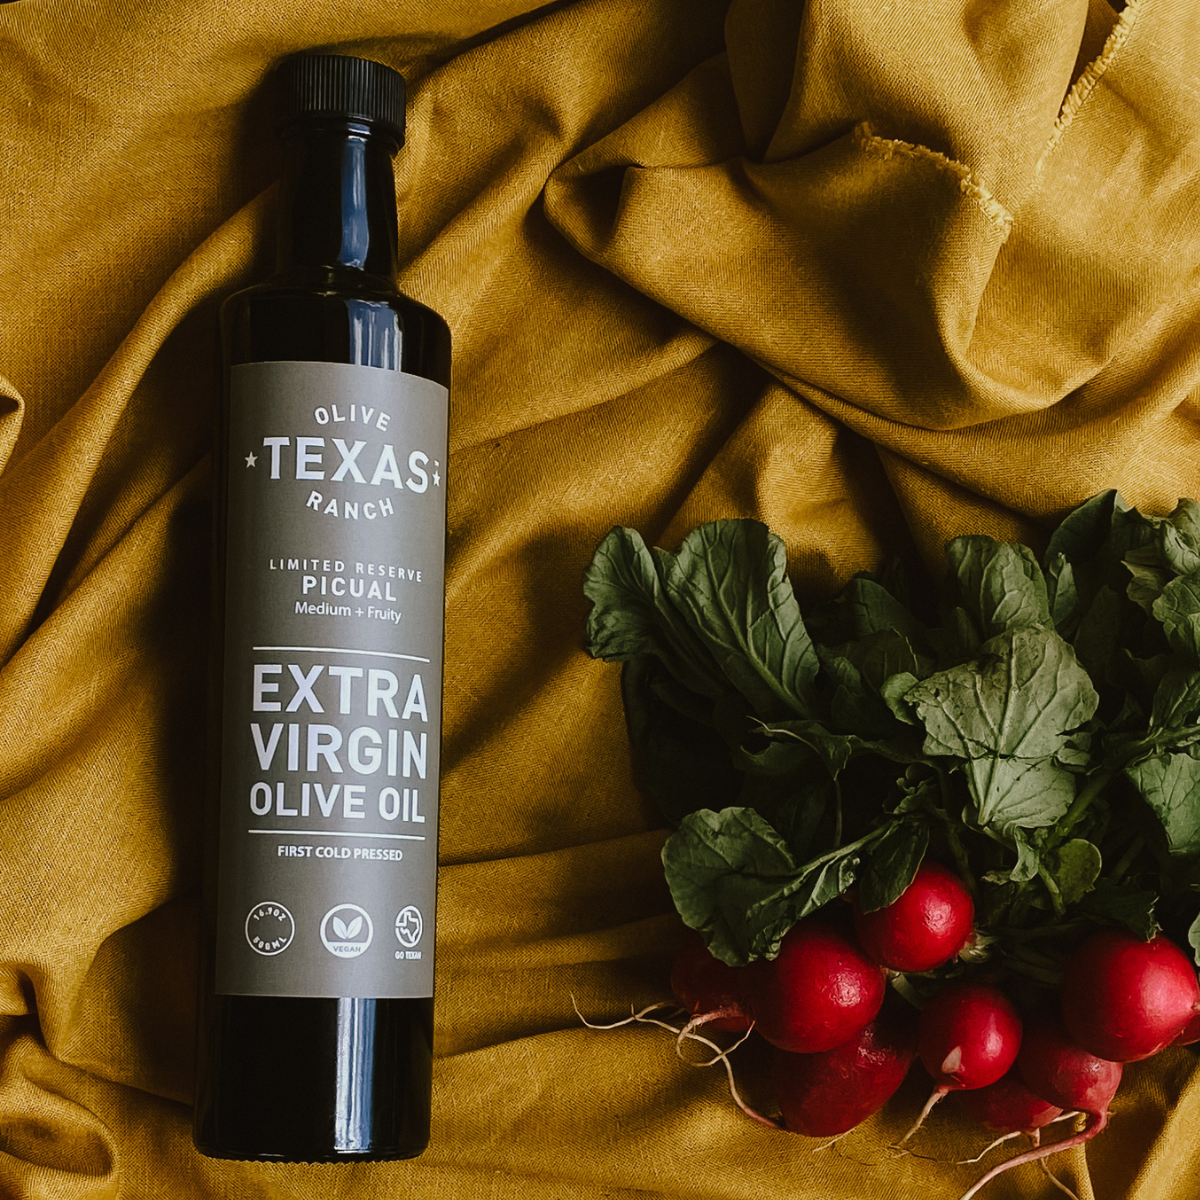 Texas Picual Extra Virgin Olive Oil